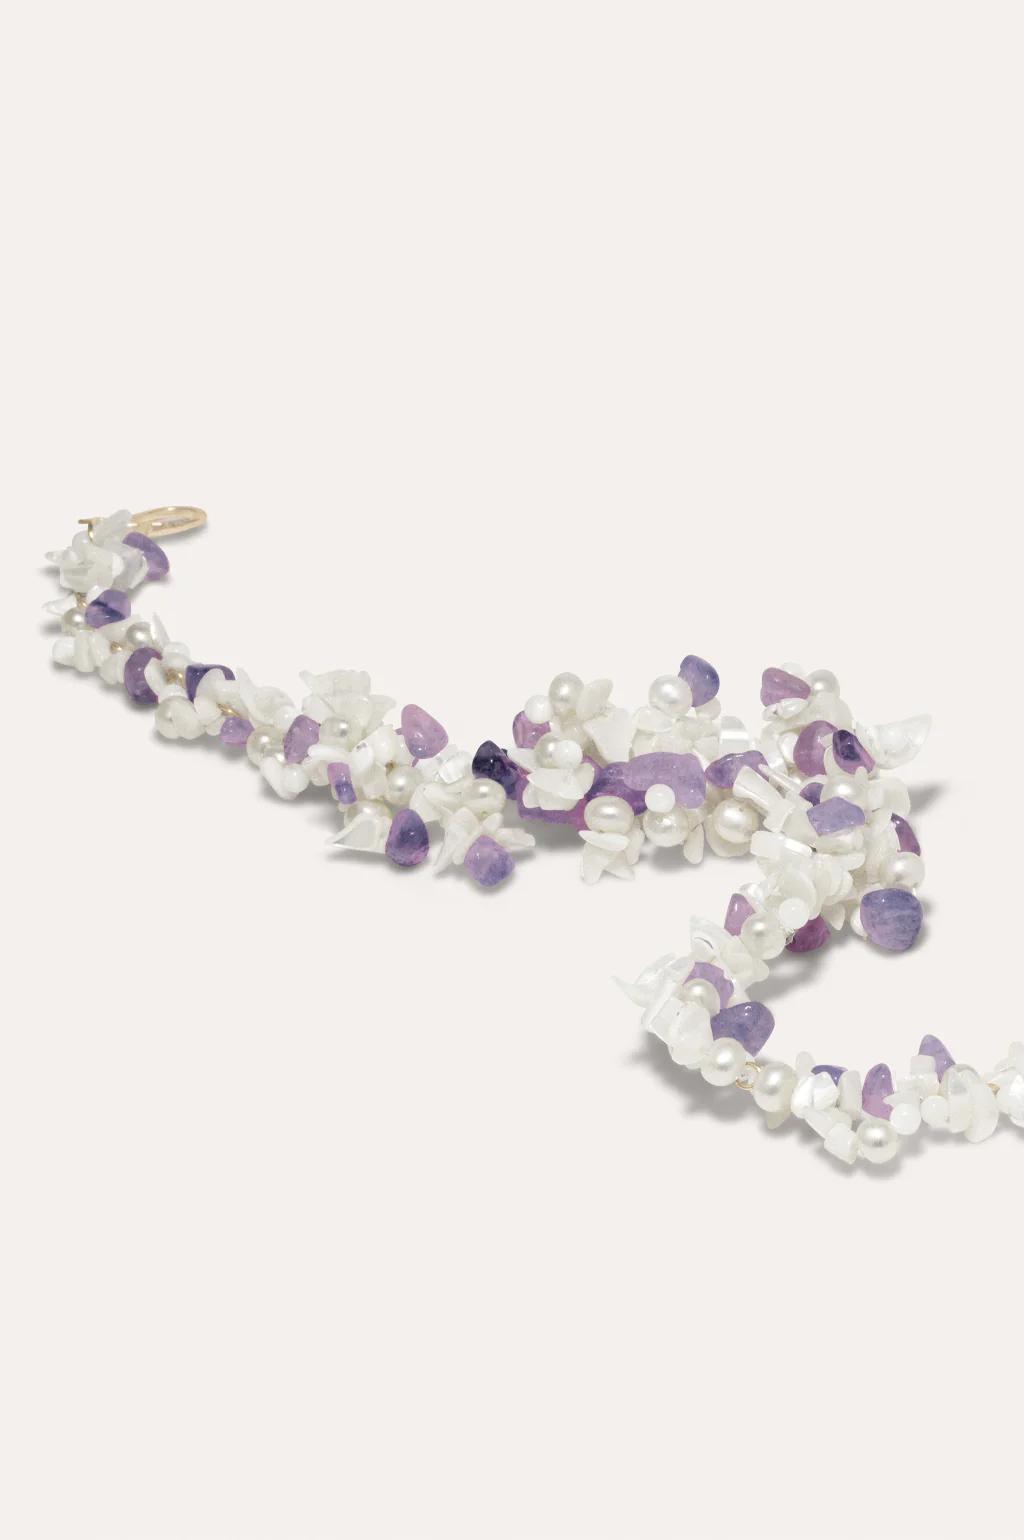 Product Image for The Shifting Stream Pearl and Amethyst Necklace